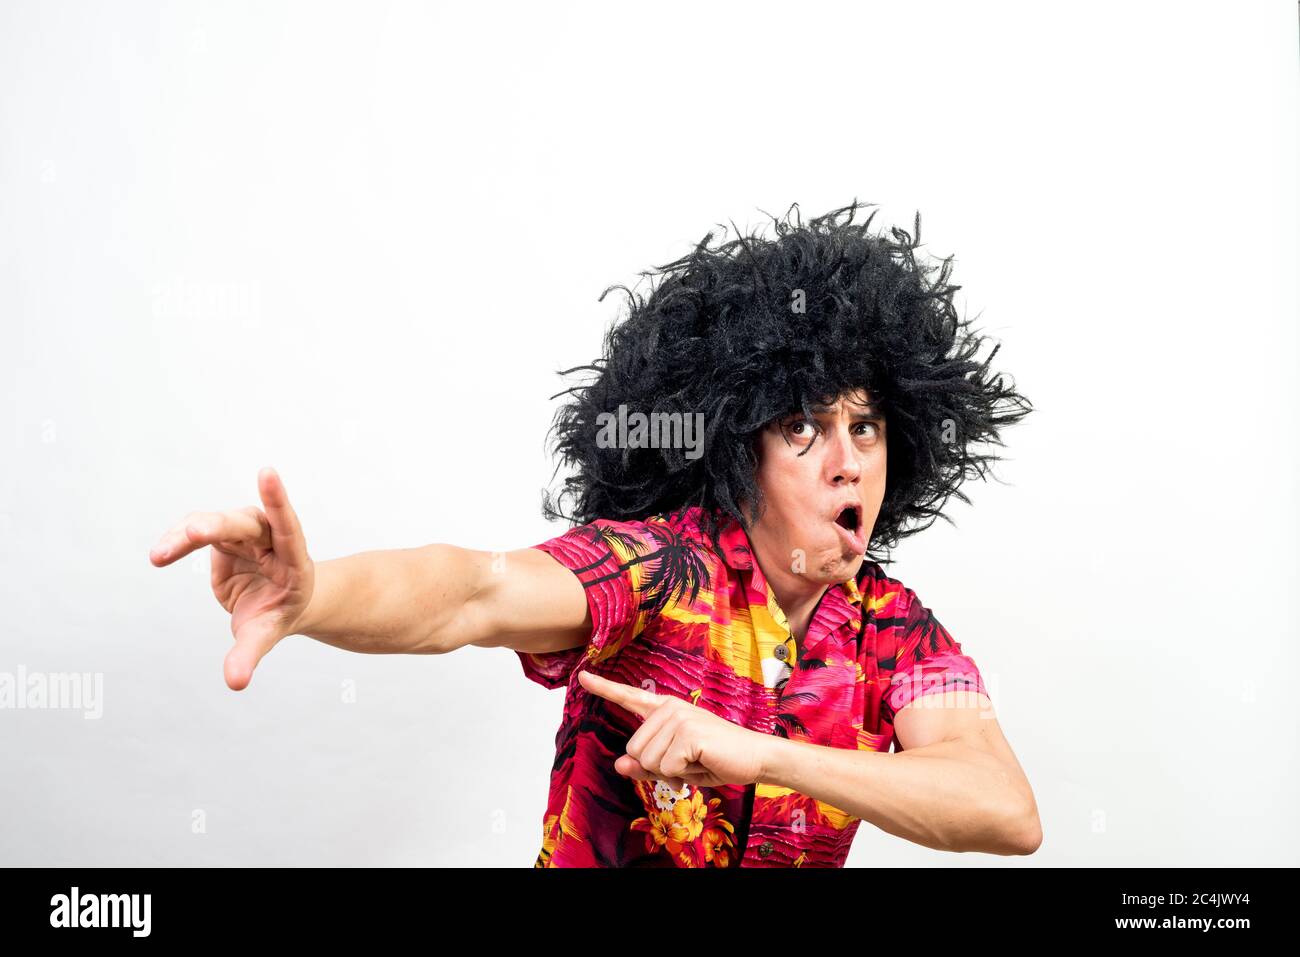 Man with afro wig and hawaiian shirt, very crazy. Mid shot. White background. Stock Photo